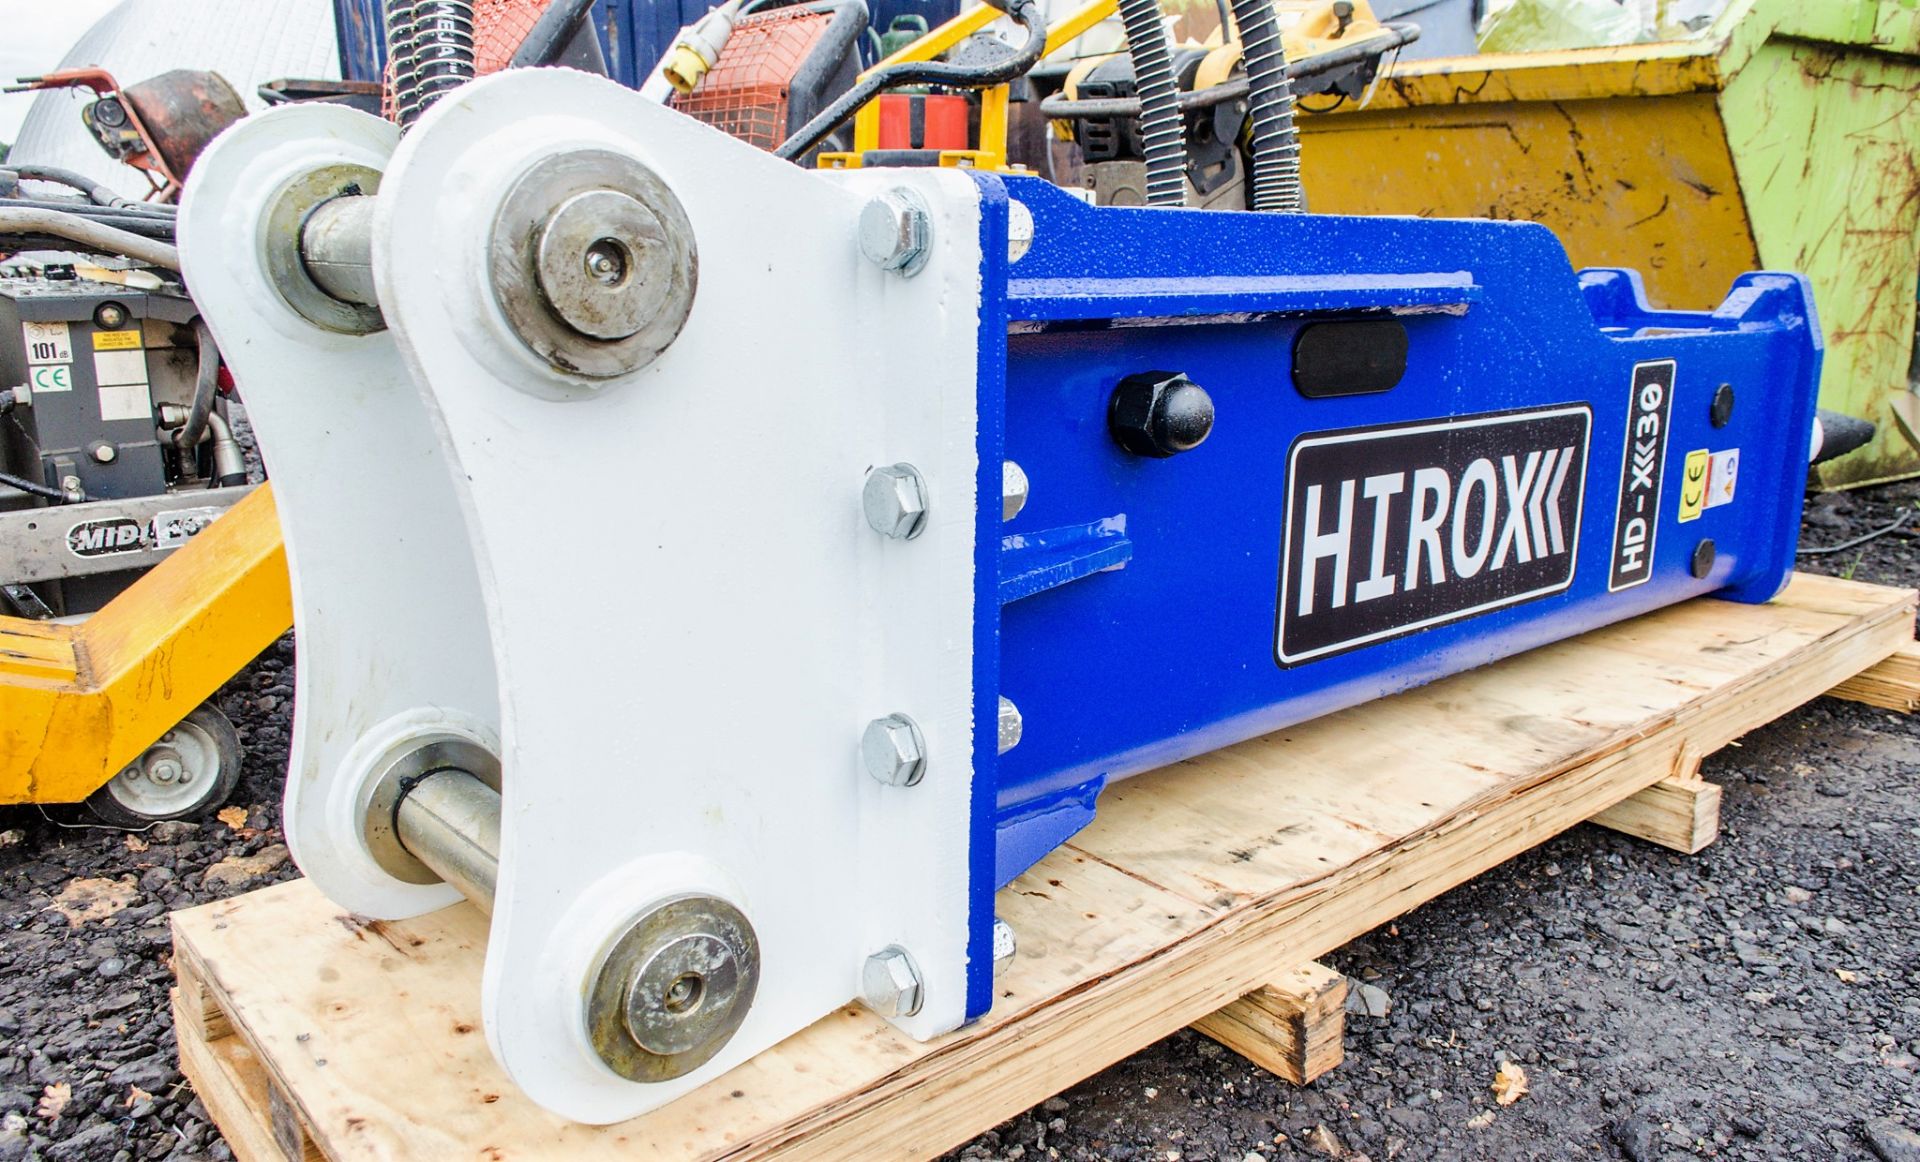 Hirox HD-X30 10 to 15 tonne hydraulic breaker Gassed & pre delivery inspected ** New & unused ** - Image 2 of 4